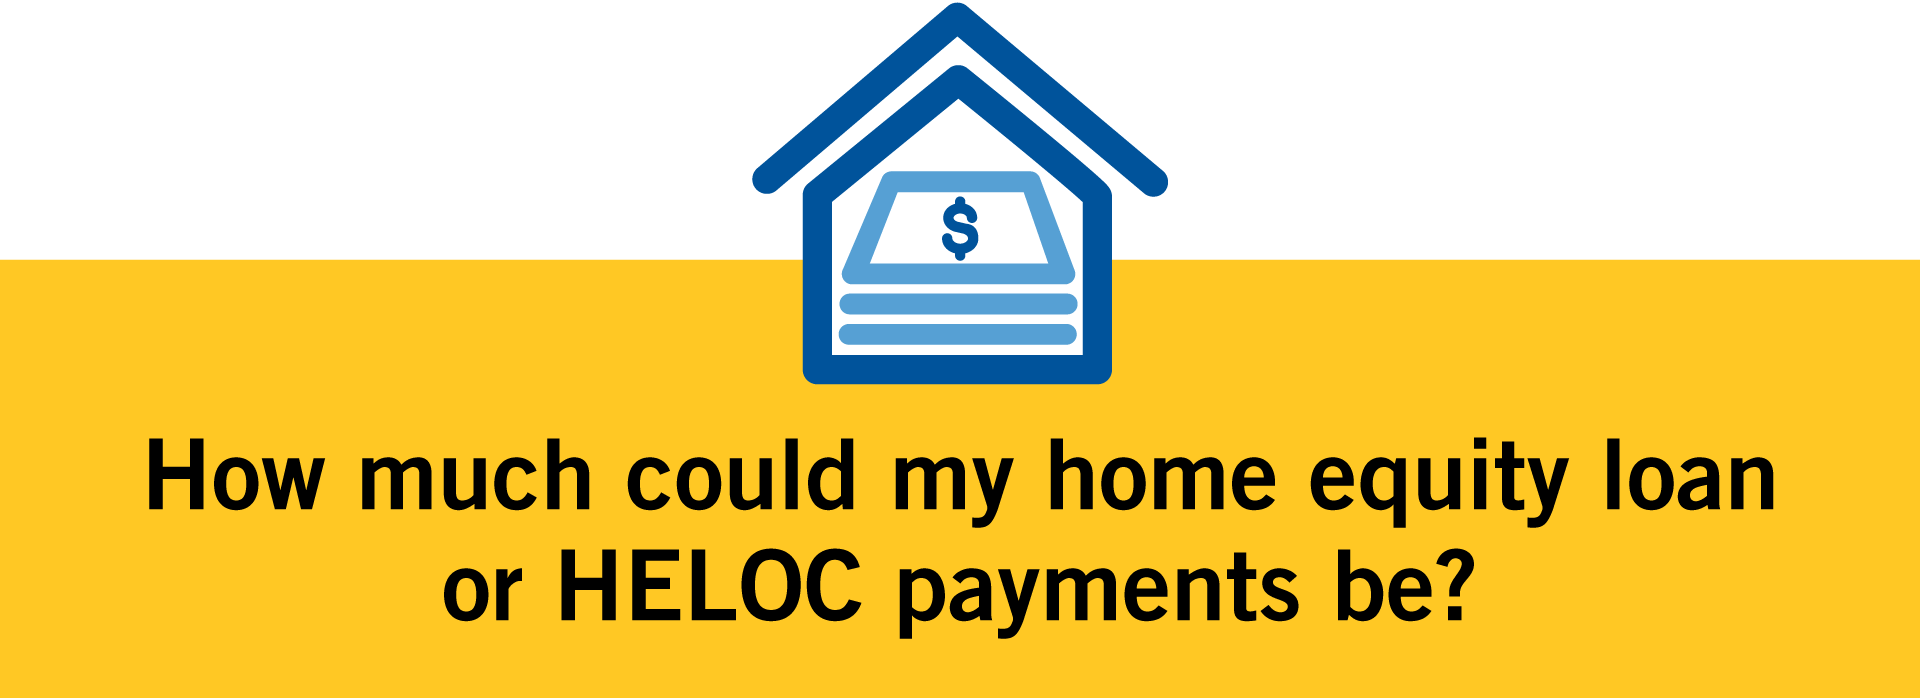 How much could my home equity loan or HELOC payments be?